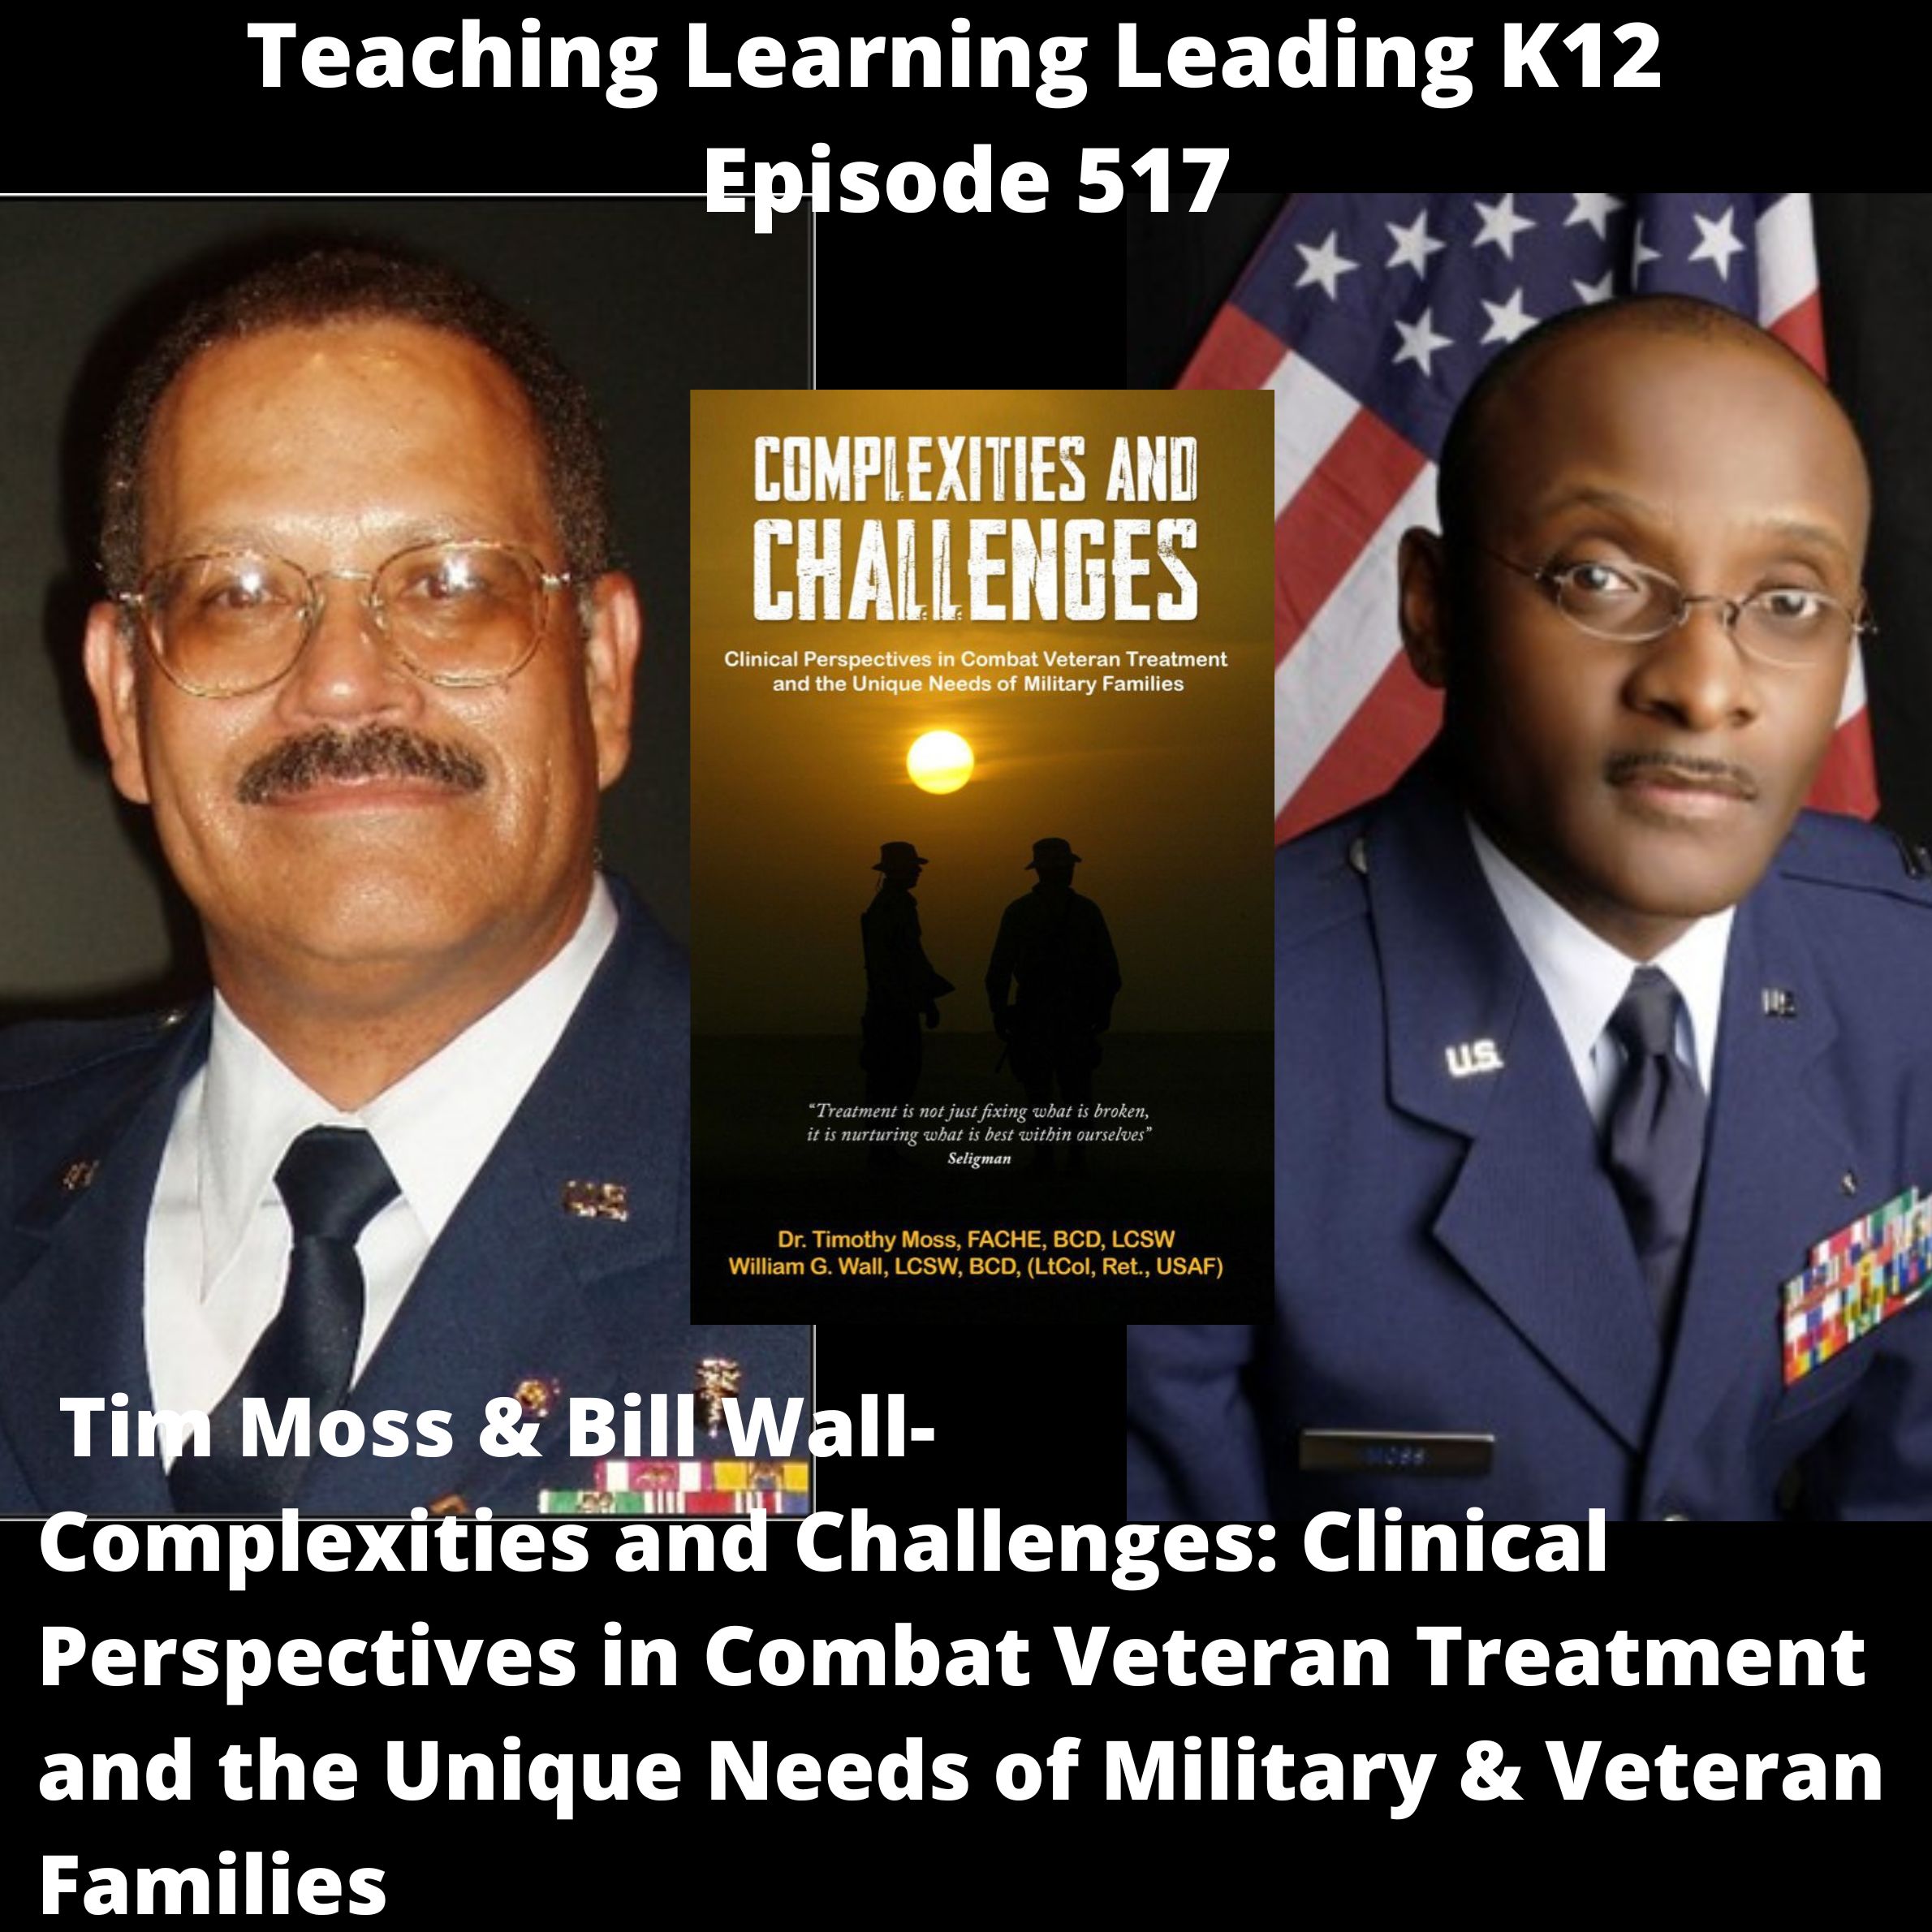 Tim Moss & Bill Wall - Complexities & Challenges: Clinical Perspectives in Combat Veteran Treatment and the Unique Needs of Military & Veteran Families - 517 Image